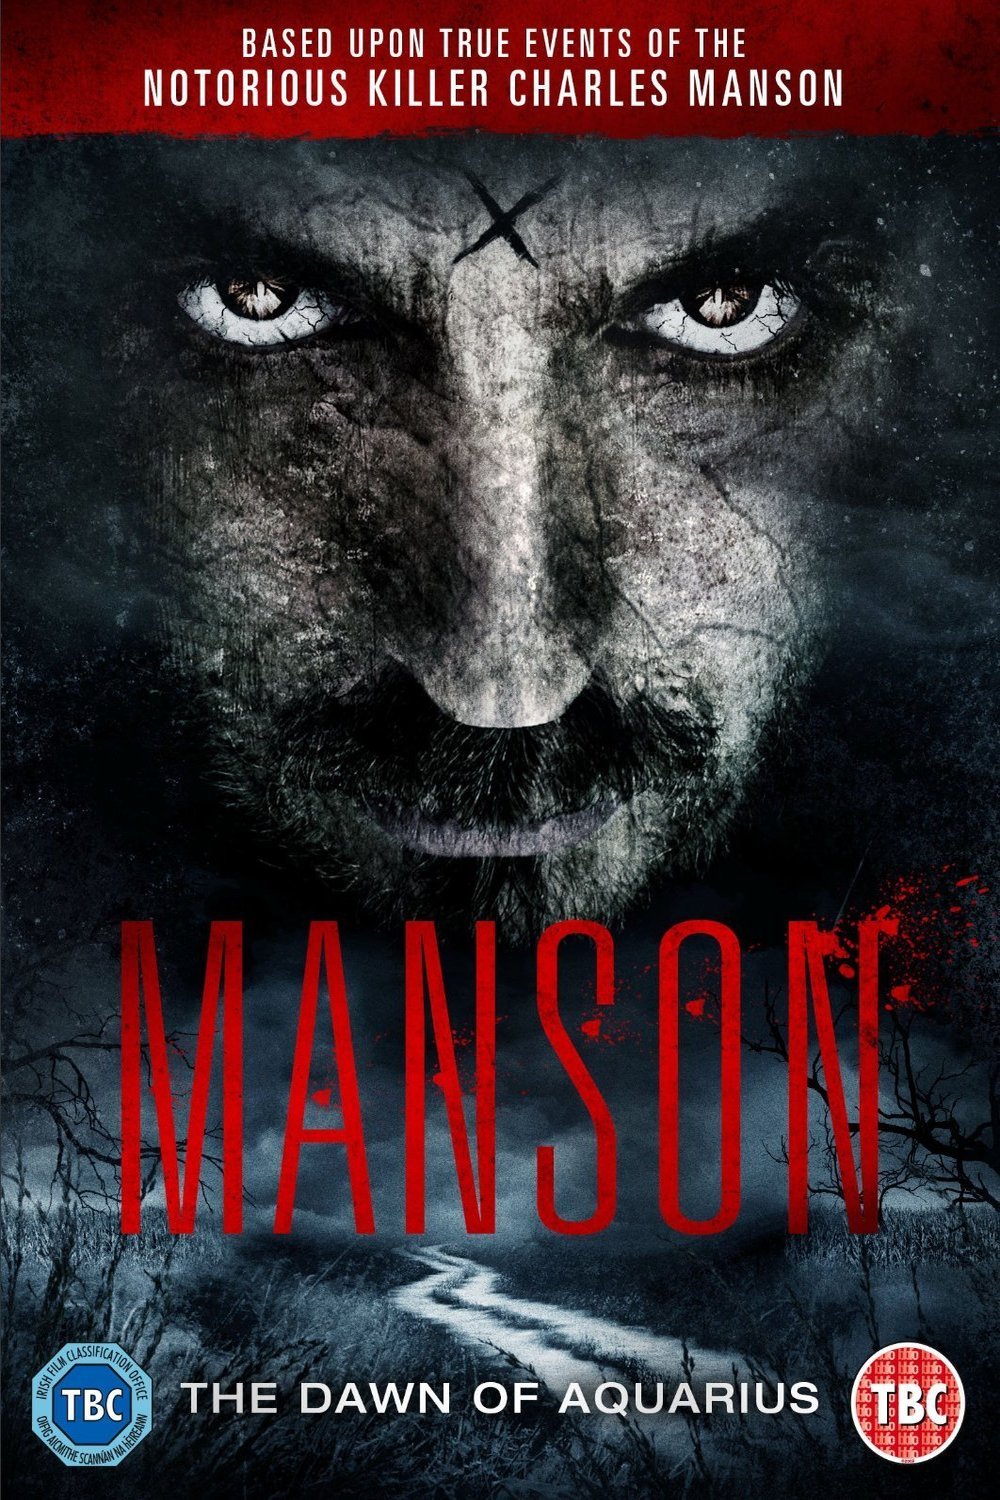 Poster of the movie Manson